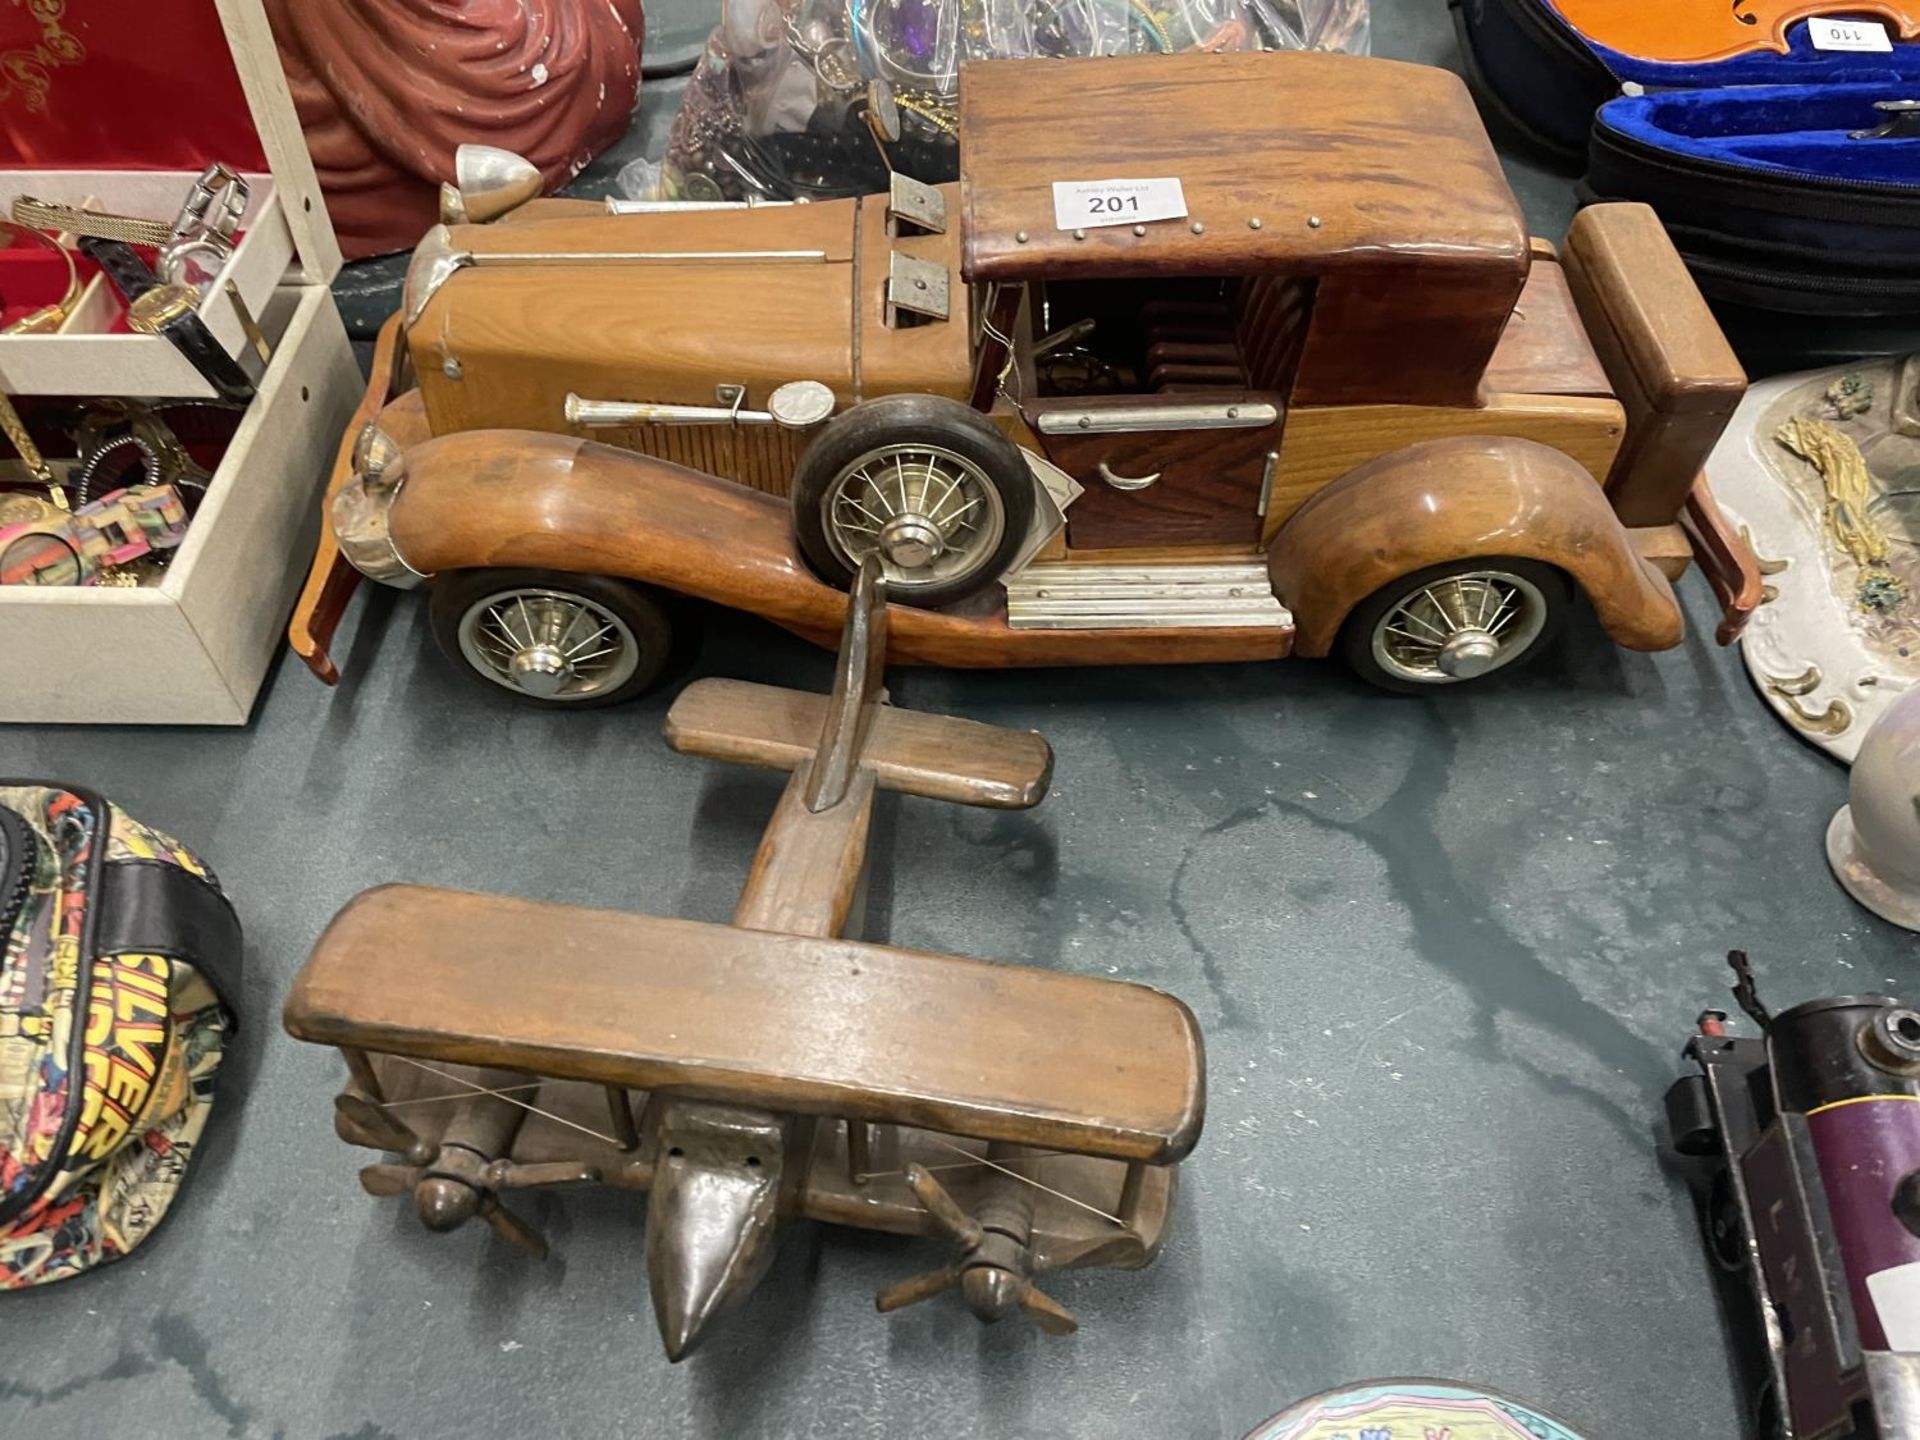 A LARGE WOODEN MODEL OF A CAR PLUS A SMALLER MODEL OF A BI-PLANE